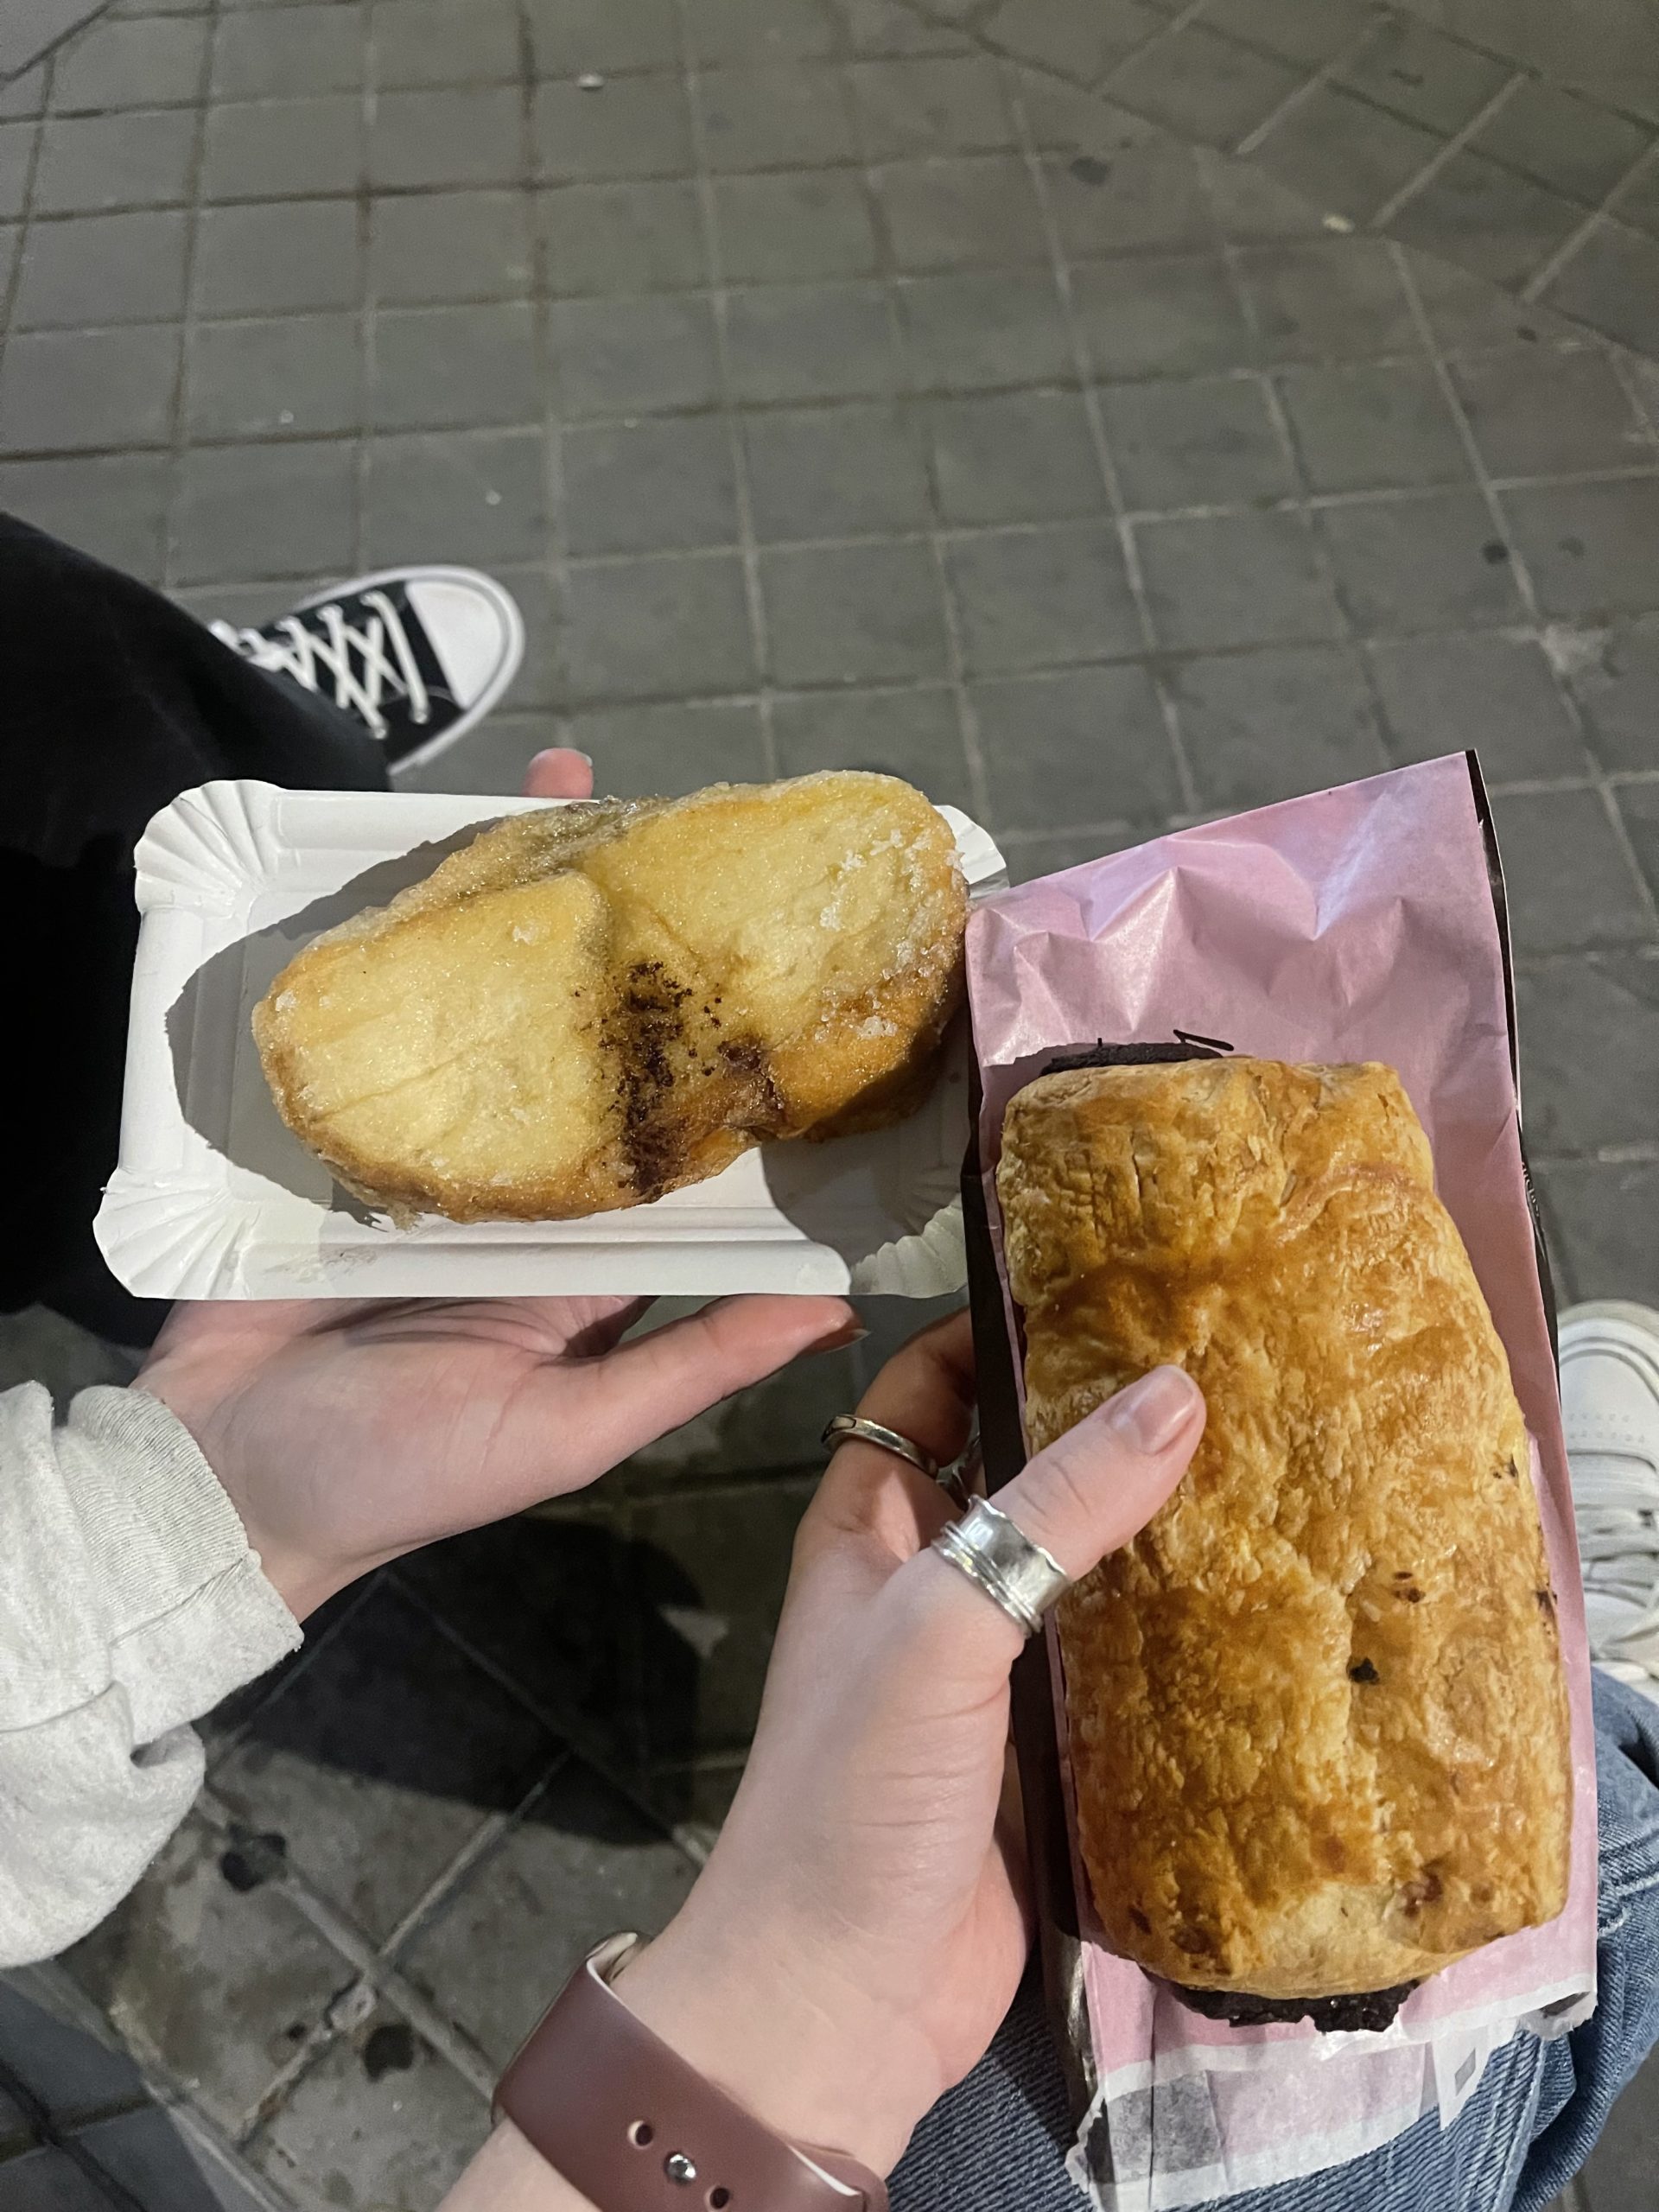 A picture of two pastries.